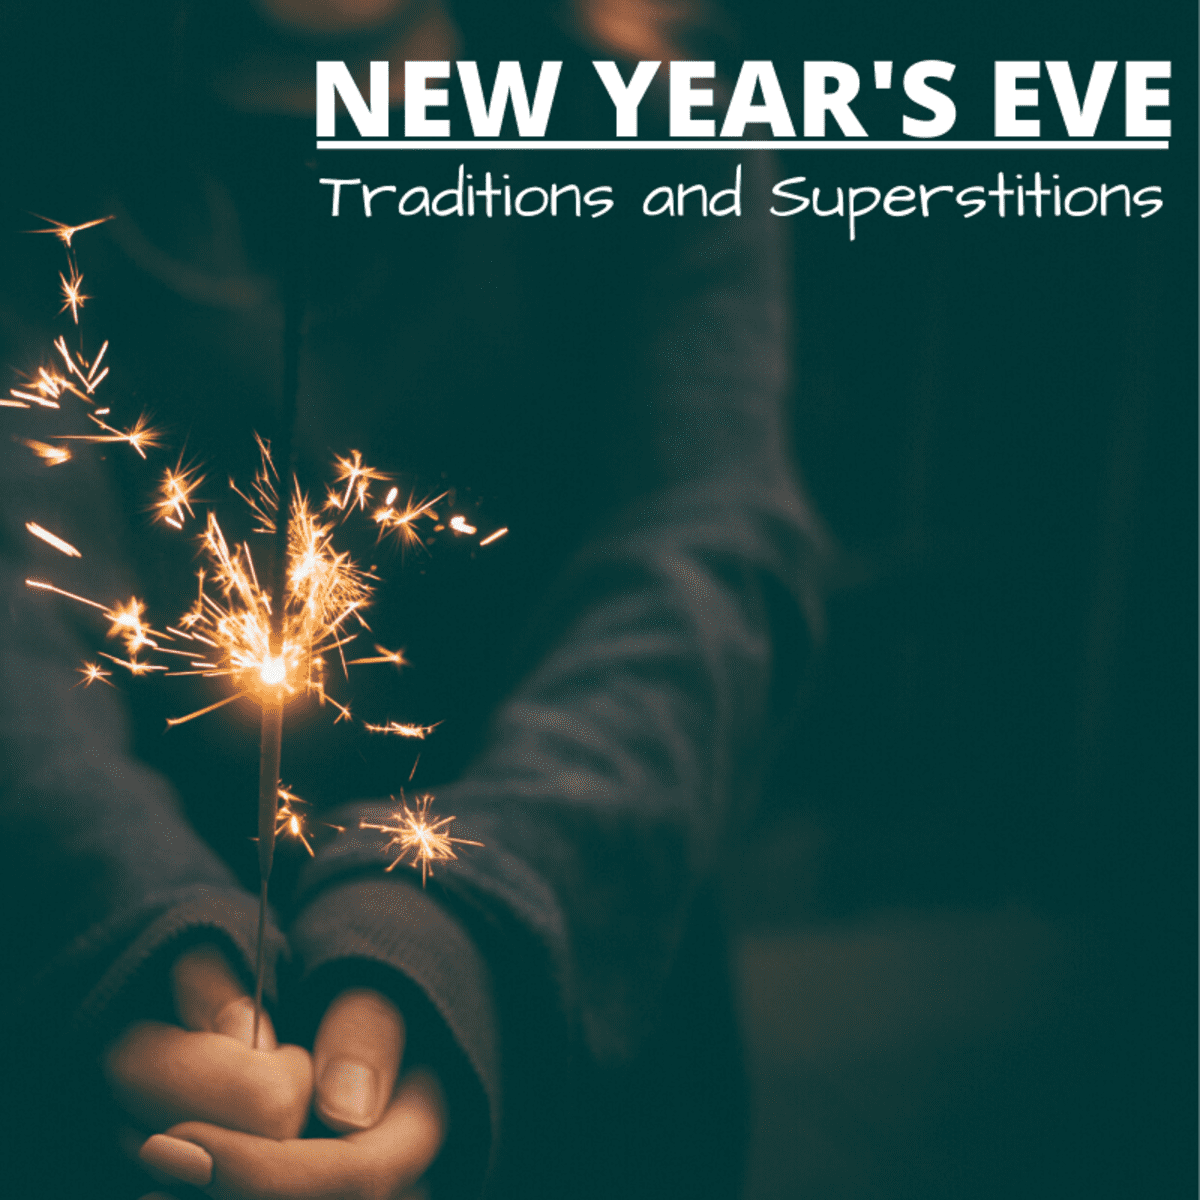 New Year's Eve Superstitions and Traditions - Holidappy